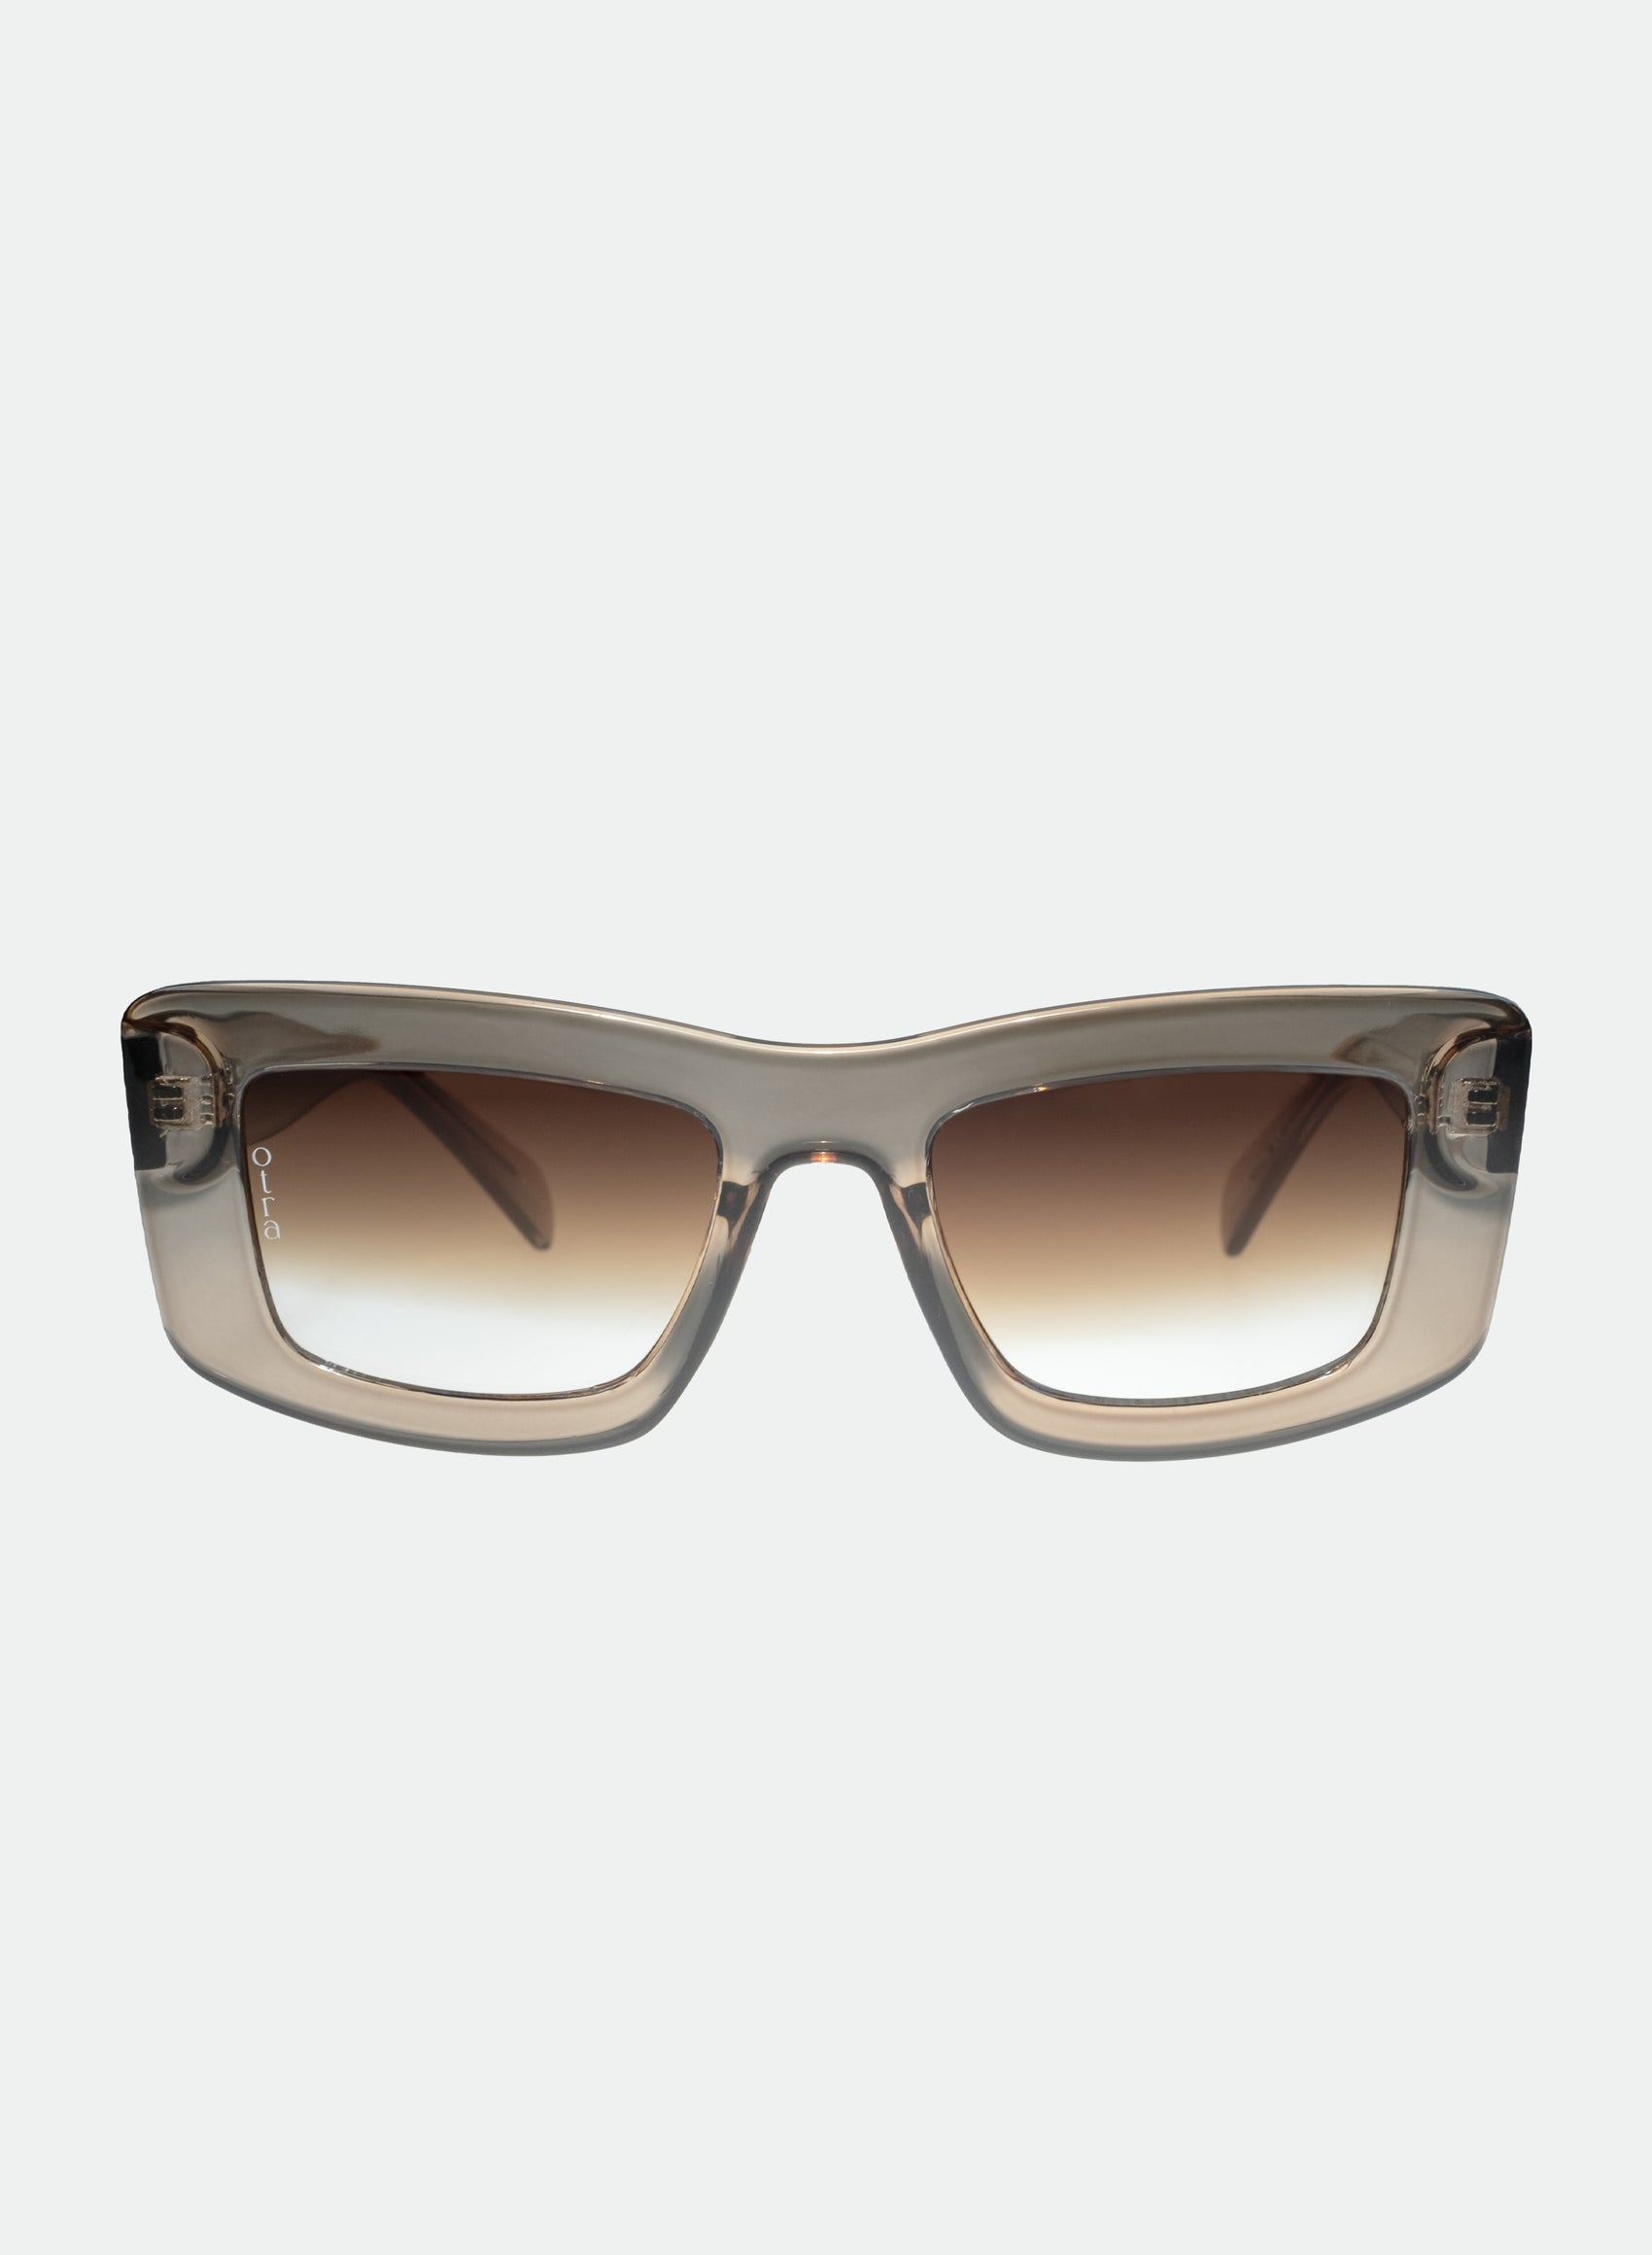 Marsha thick cat eye sunglasses in brown color